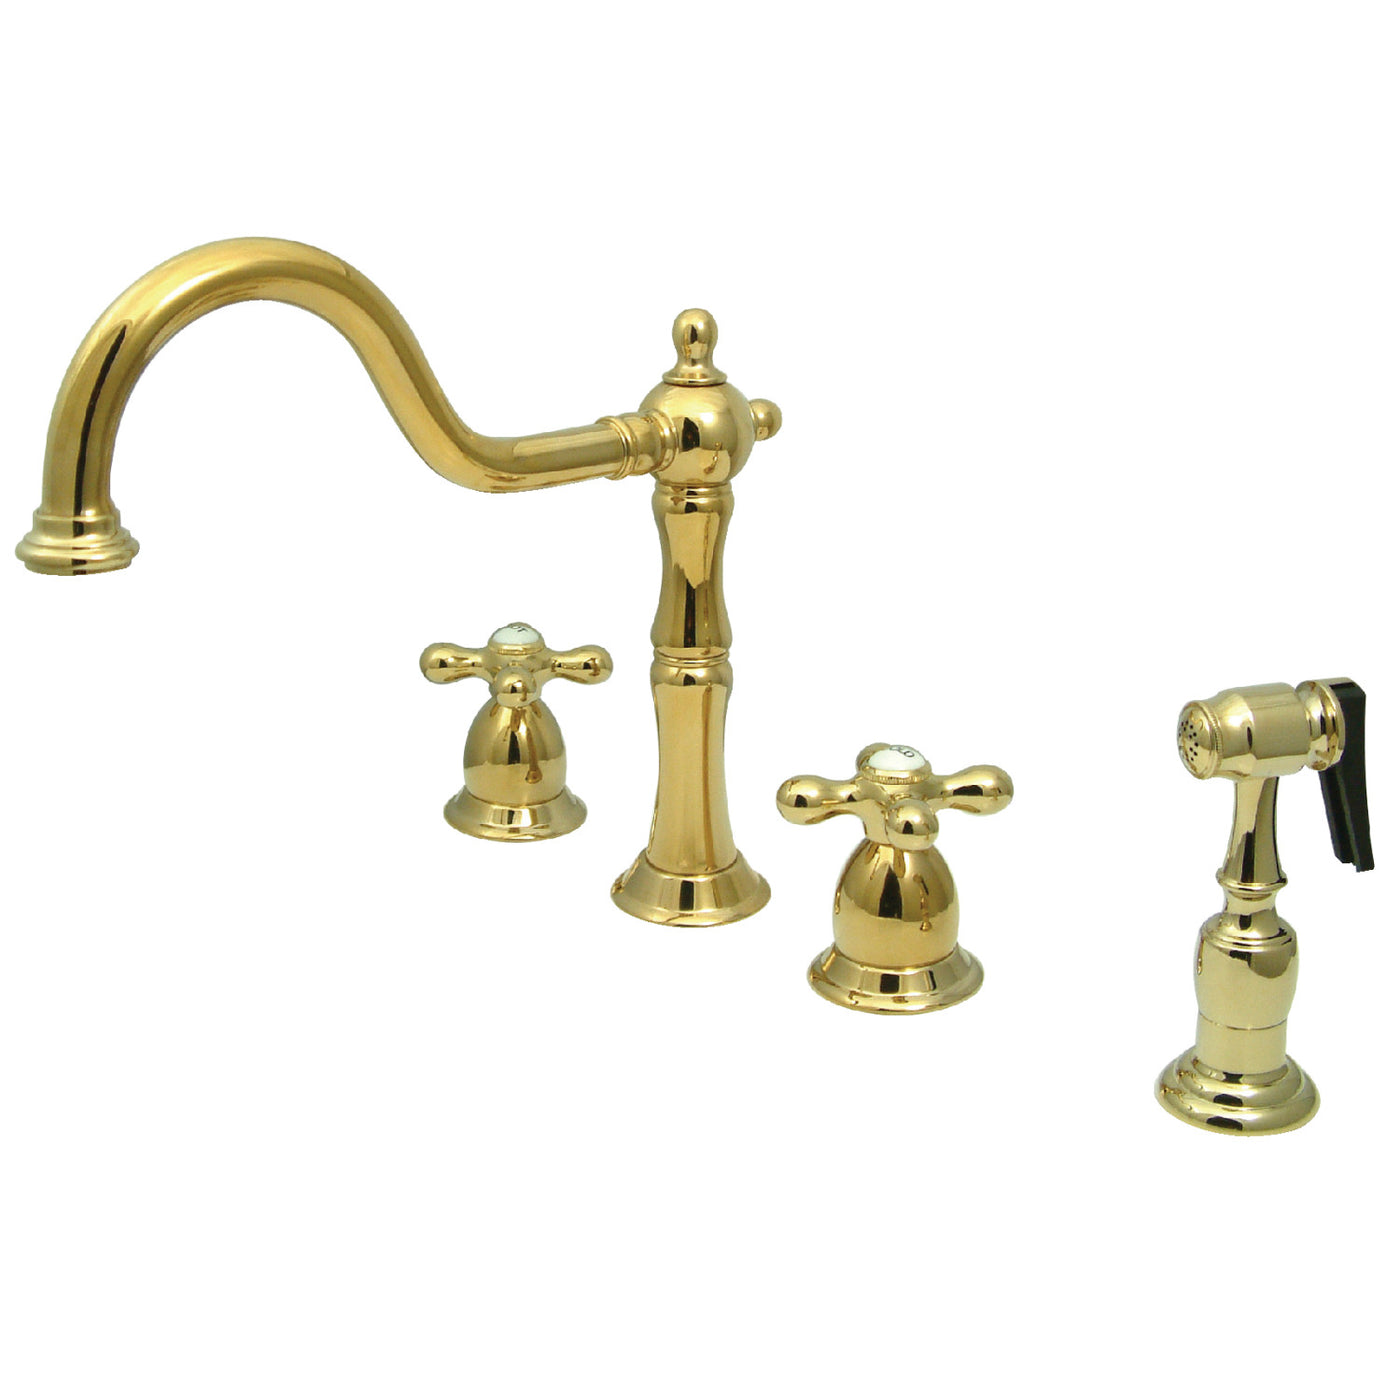 Elements of Design EB1792AXBS Widespread Kitchen Faucet with Brass Sprayer, Polished Brass